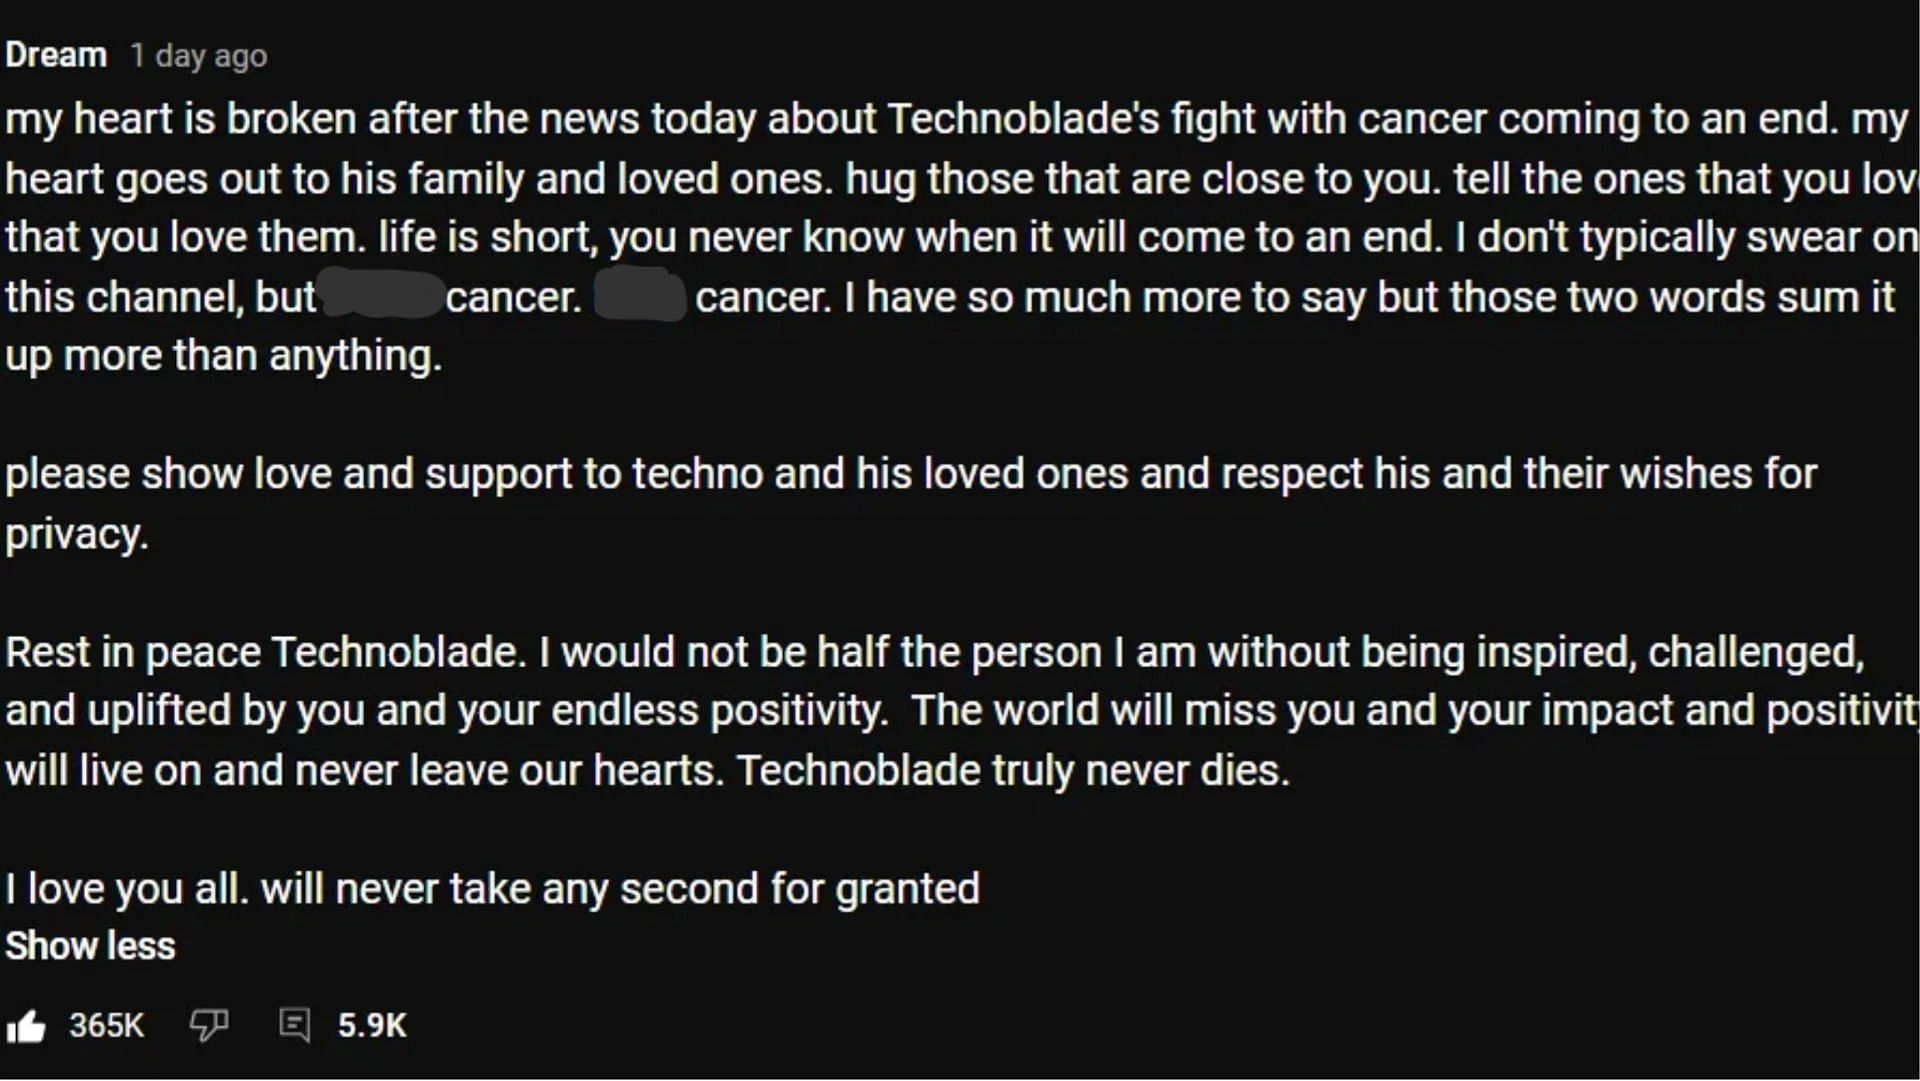 Technoblade never dies -  pays tribute to Minecraft legend  Technoblade, fans share their love